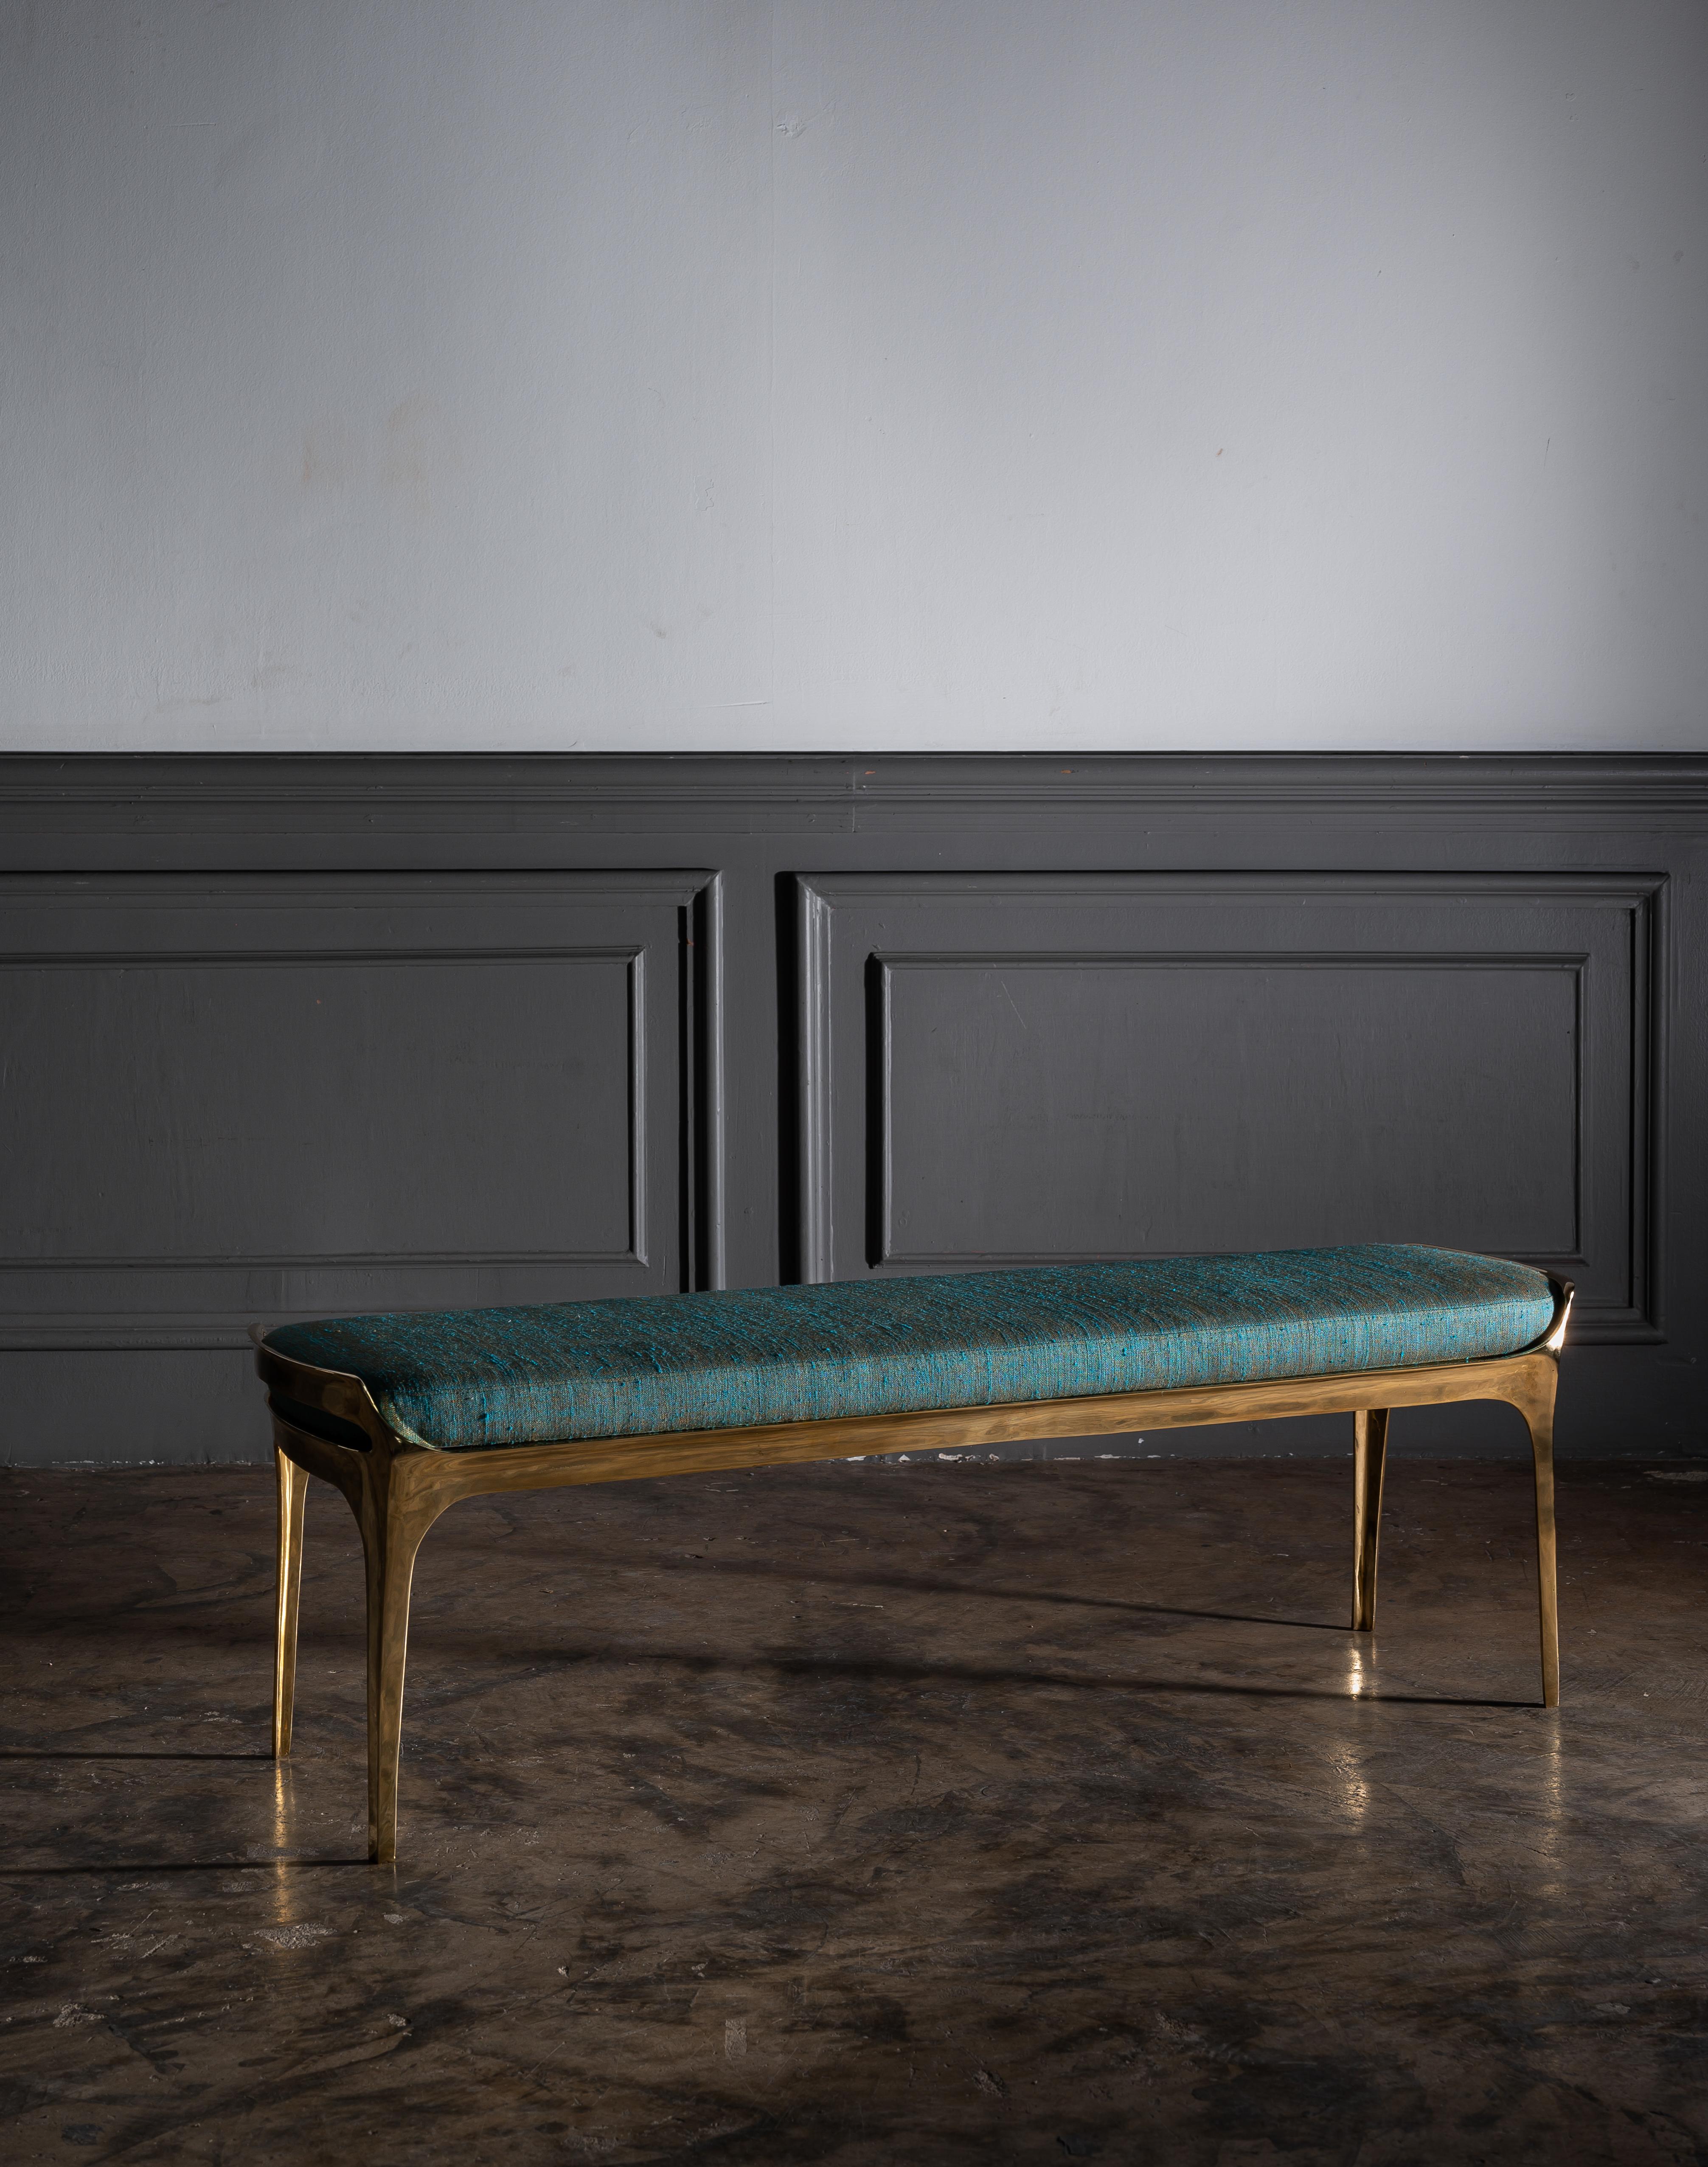 Sculptural Cast Bronze Bruda Bench in Polished Gold Bronze by Elan Atelier

Cast bronze Bruda bench in polished gold finish with marine blue green silk seat cushion. 

Custom sizes and finishes available.

Dimensions/
w 50 x d 13.8 x h 16 in
w 127 x